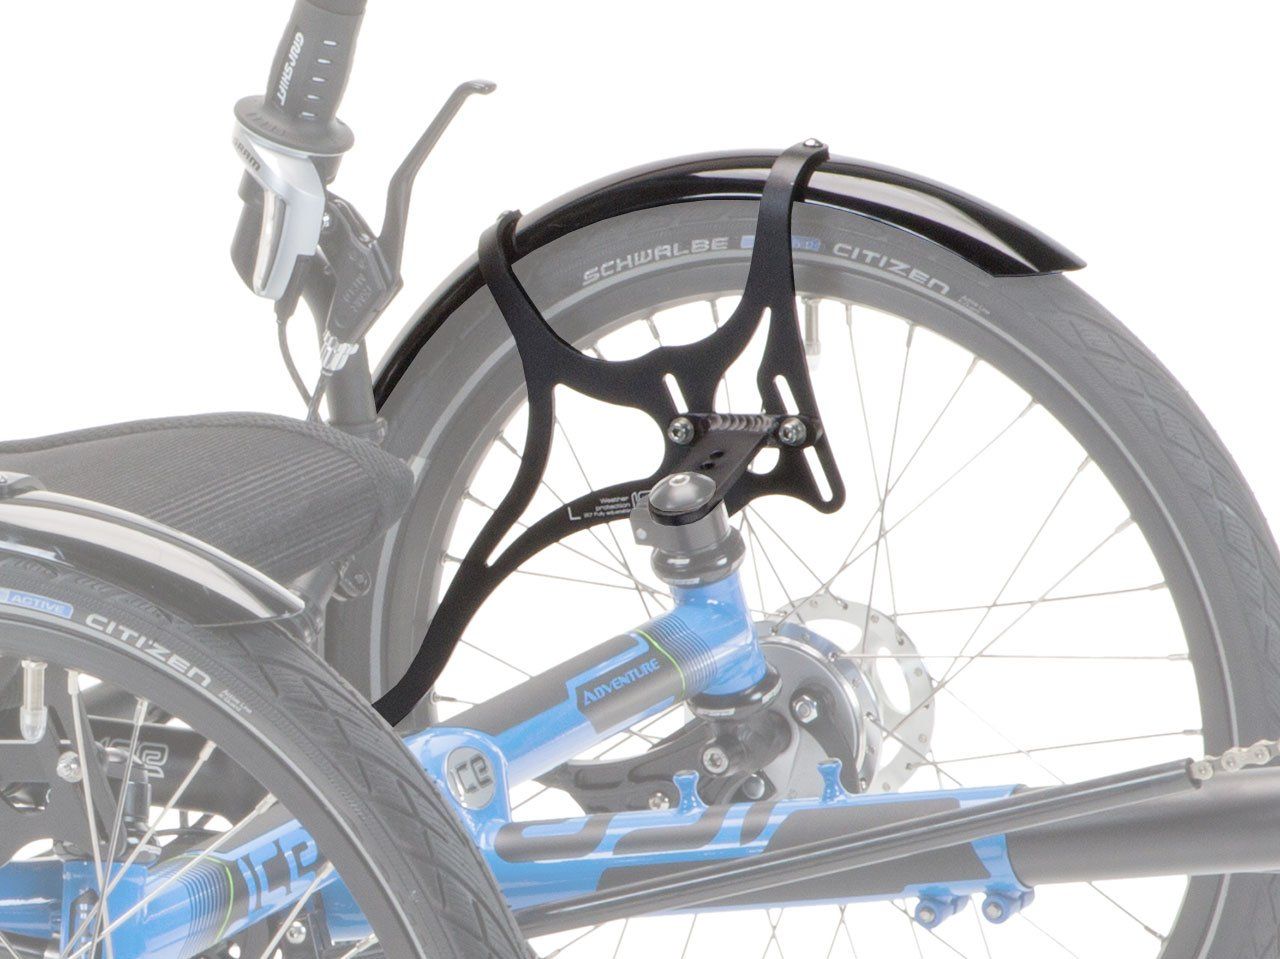 20 inch Front mudguard set for non-suspended wheels